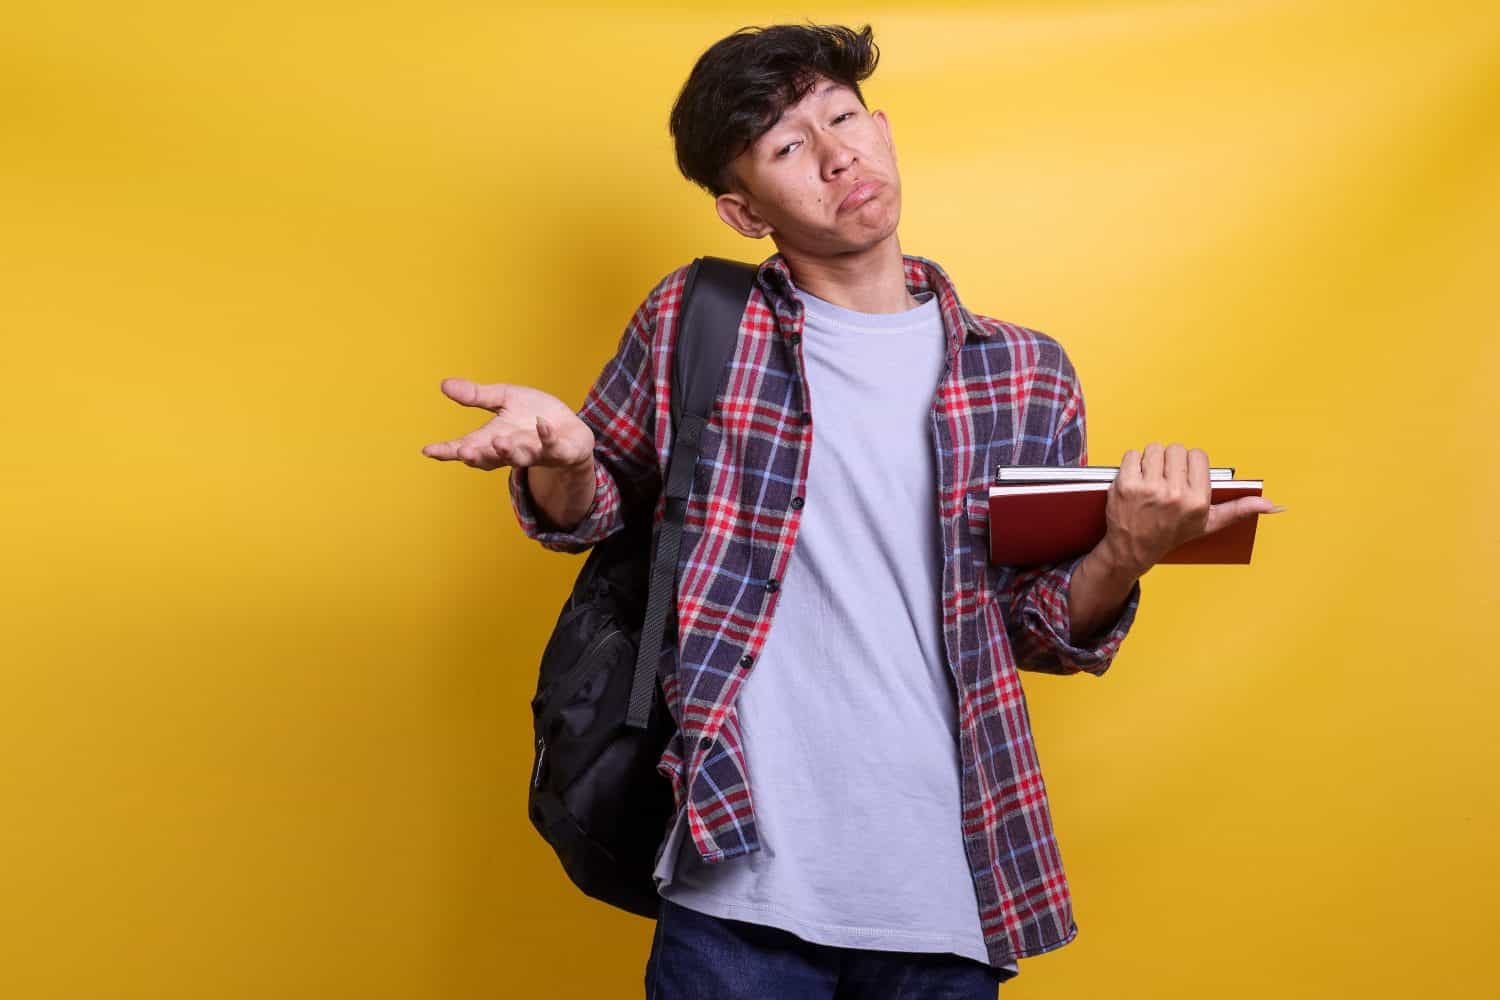 Young Asian student man wearing backpack and holding books, shrugging shoulders showing don't know or I don't care expression isolated over yellow background